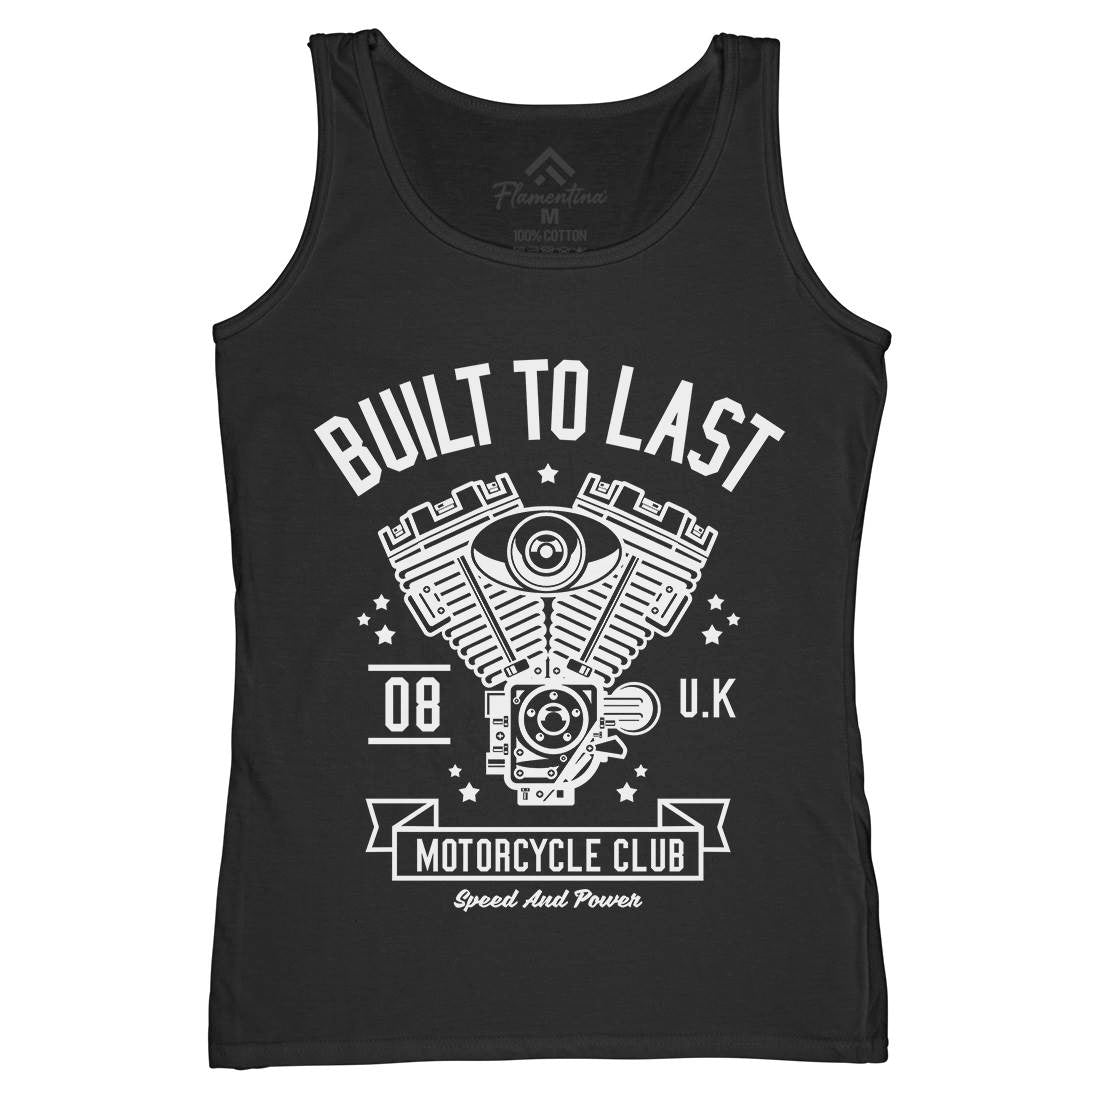 Built To Last Womens Organic Tank Top Vest Motorcycles A215